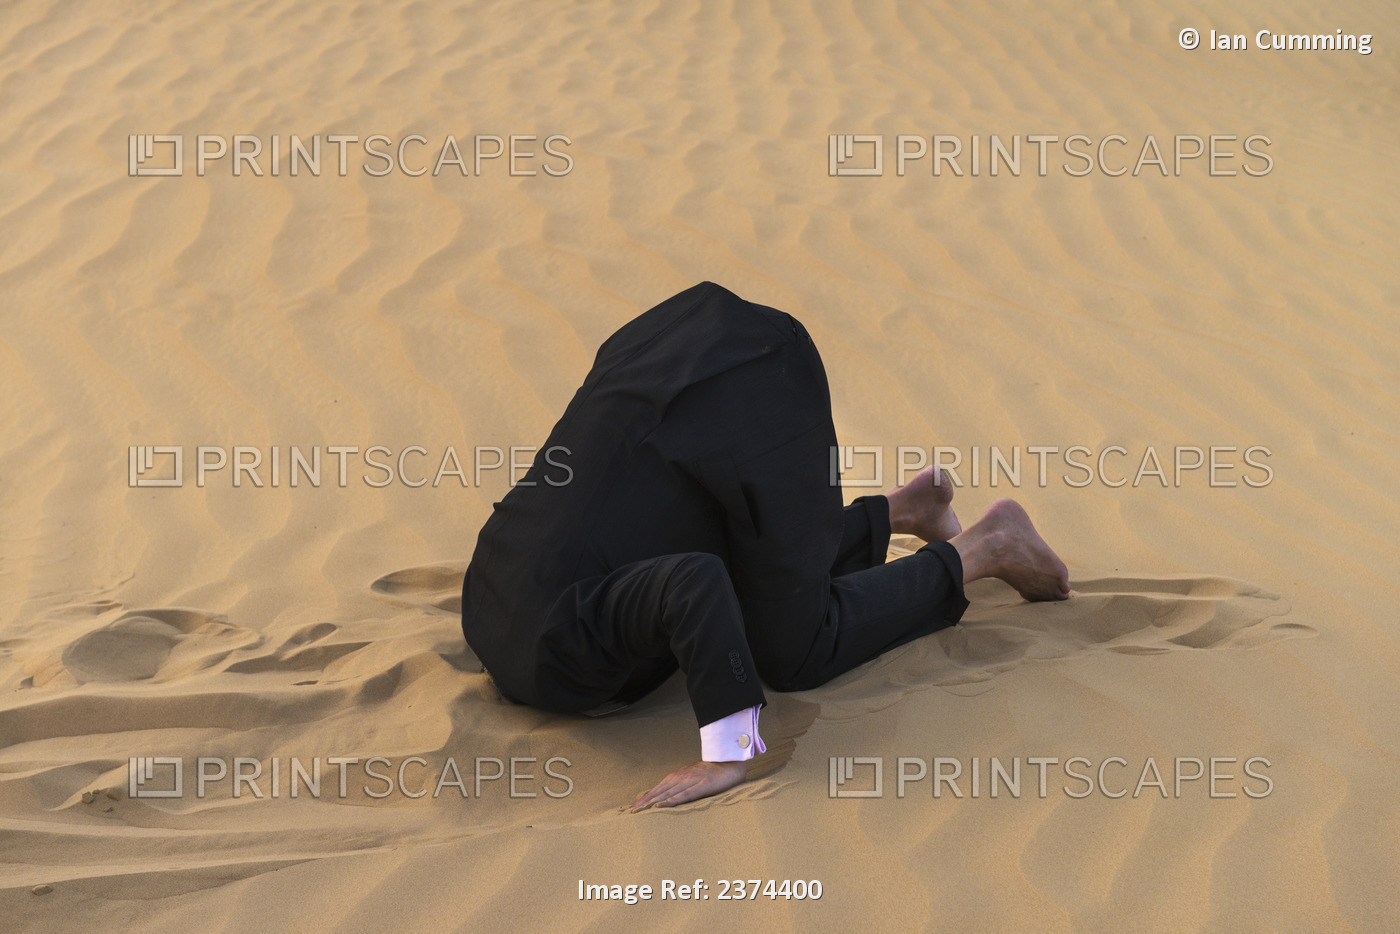 Man In Smart Suit With Head Buried In The Sand; Dubai, United Arab Emirates